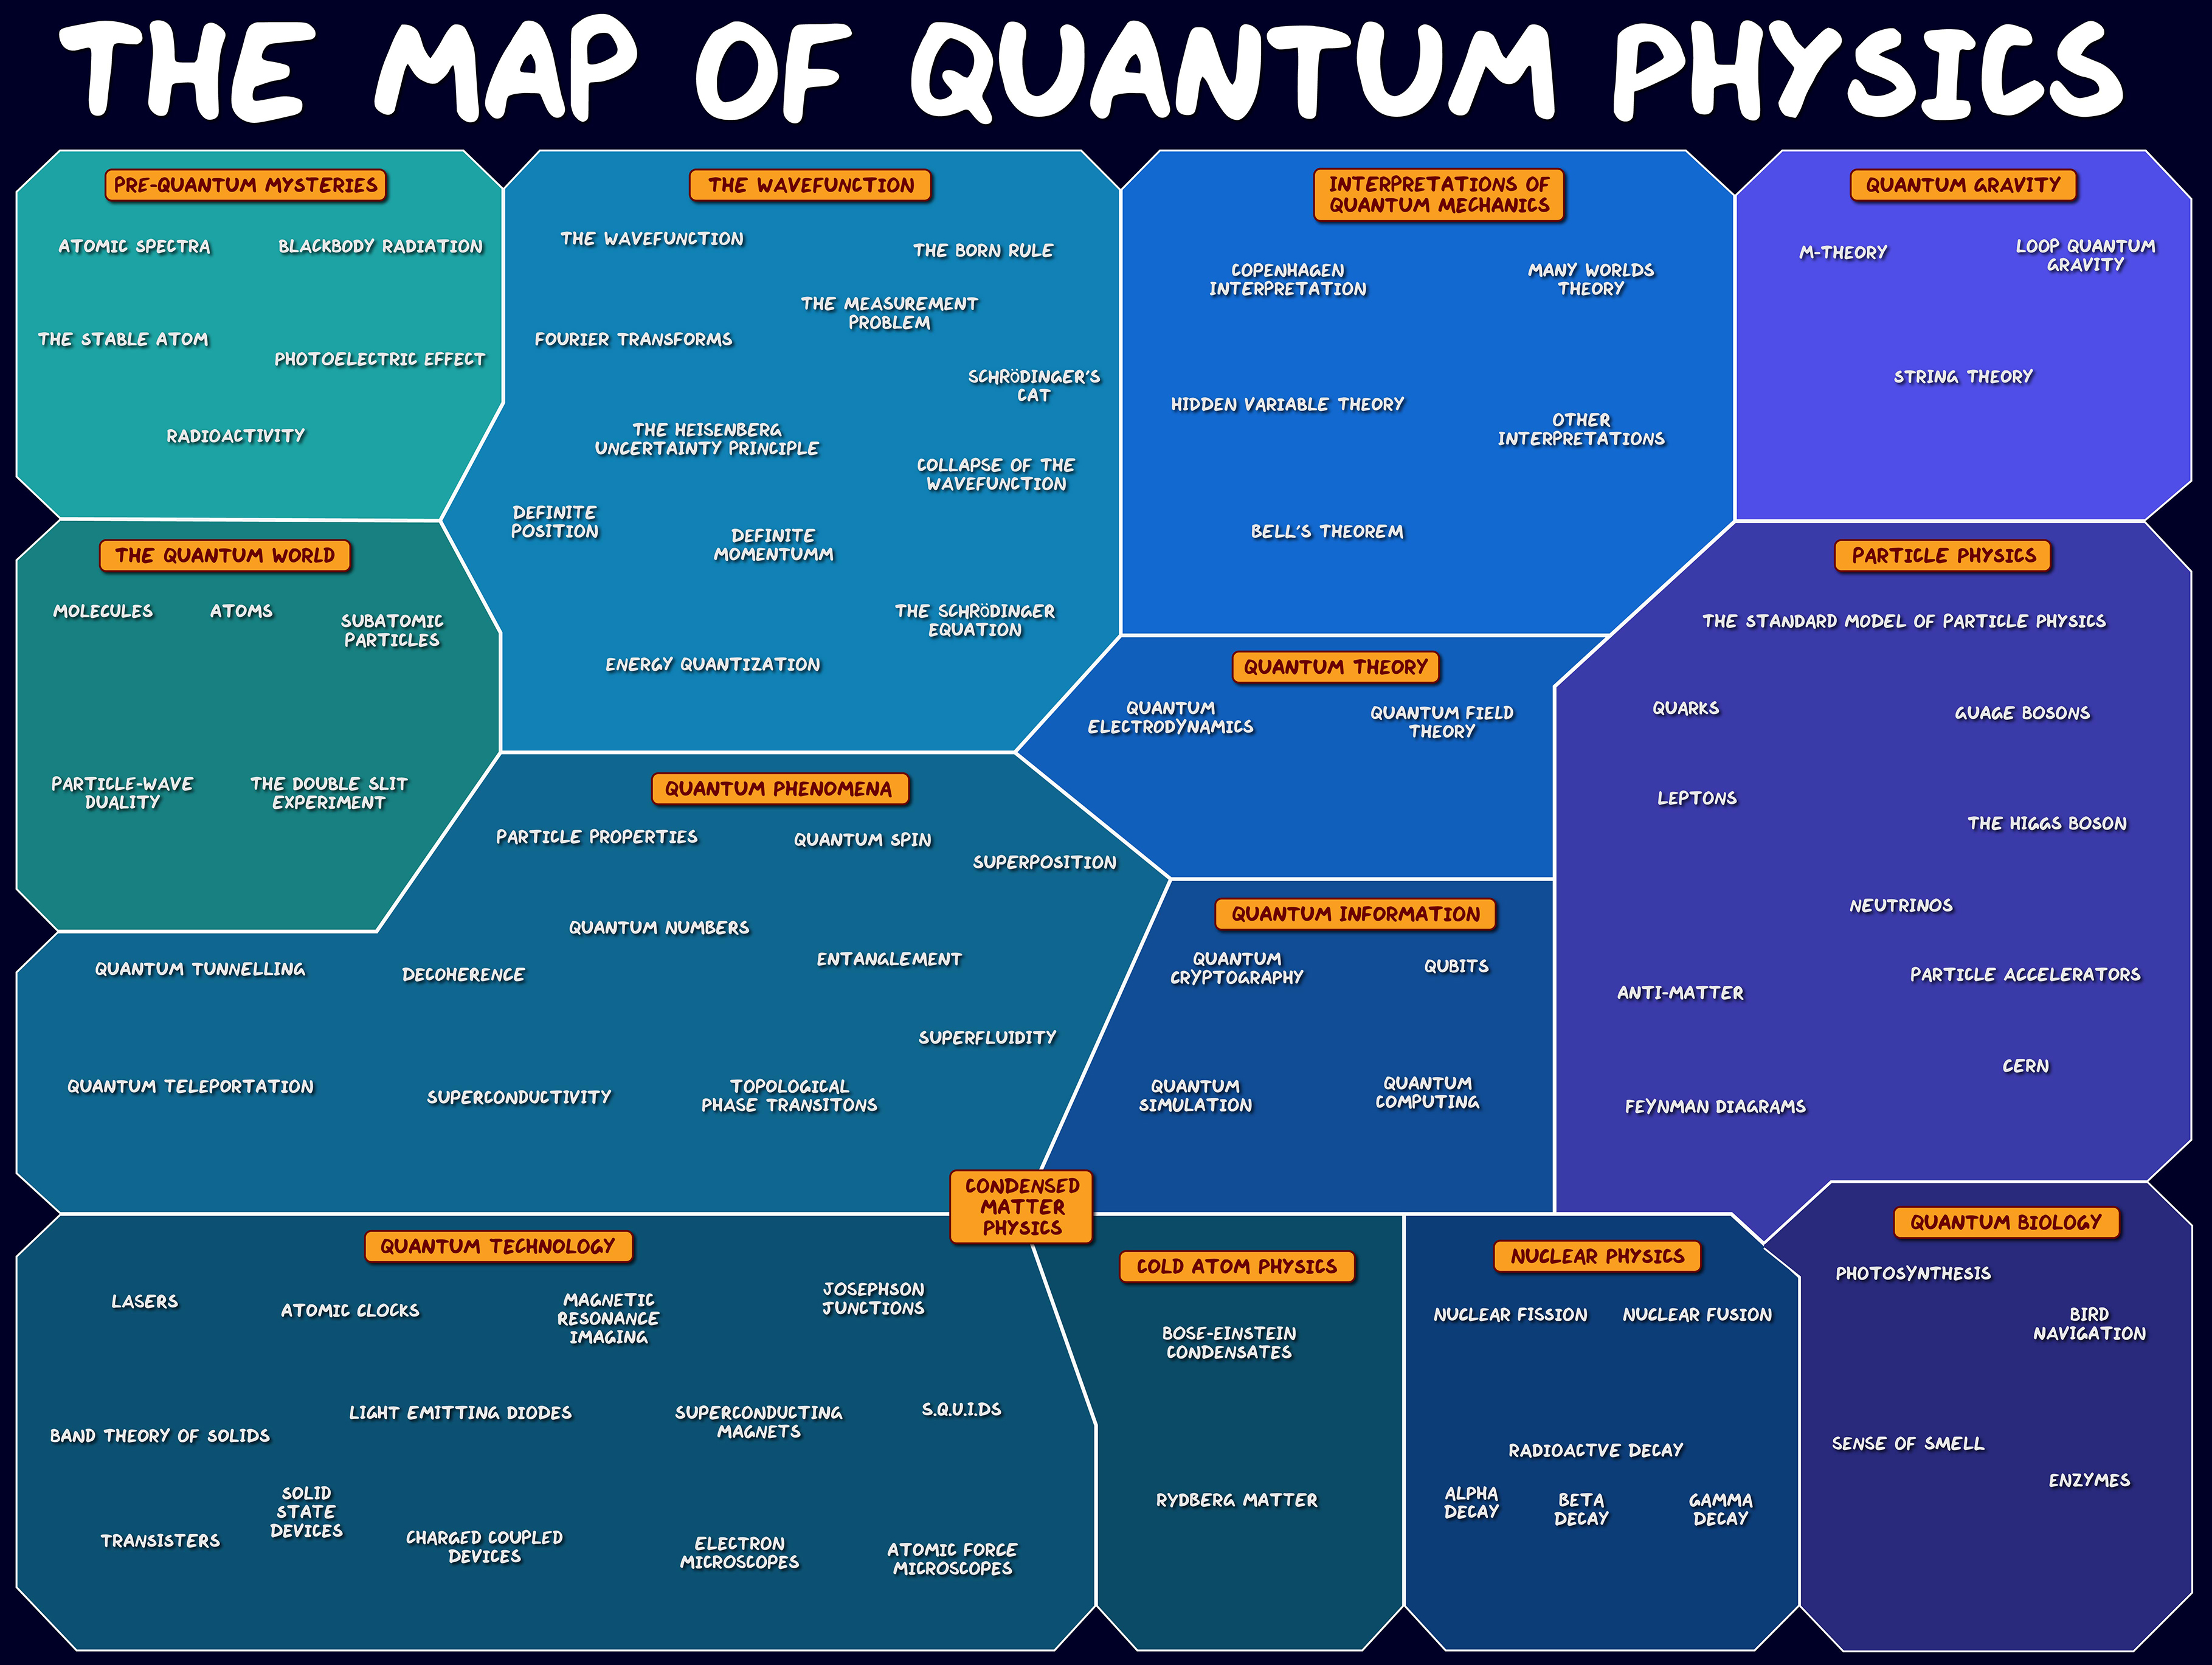 Dominic Walliman on Twitter: "I'm working on a Map of Quantum Physics video and I'm worried I'm missing things. Any experts on here willing to give it a look over to see